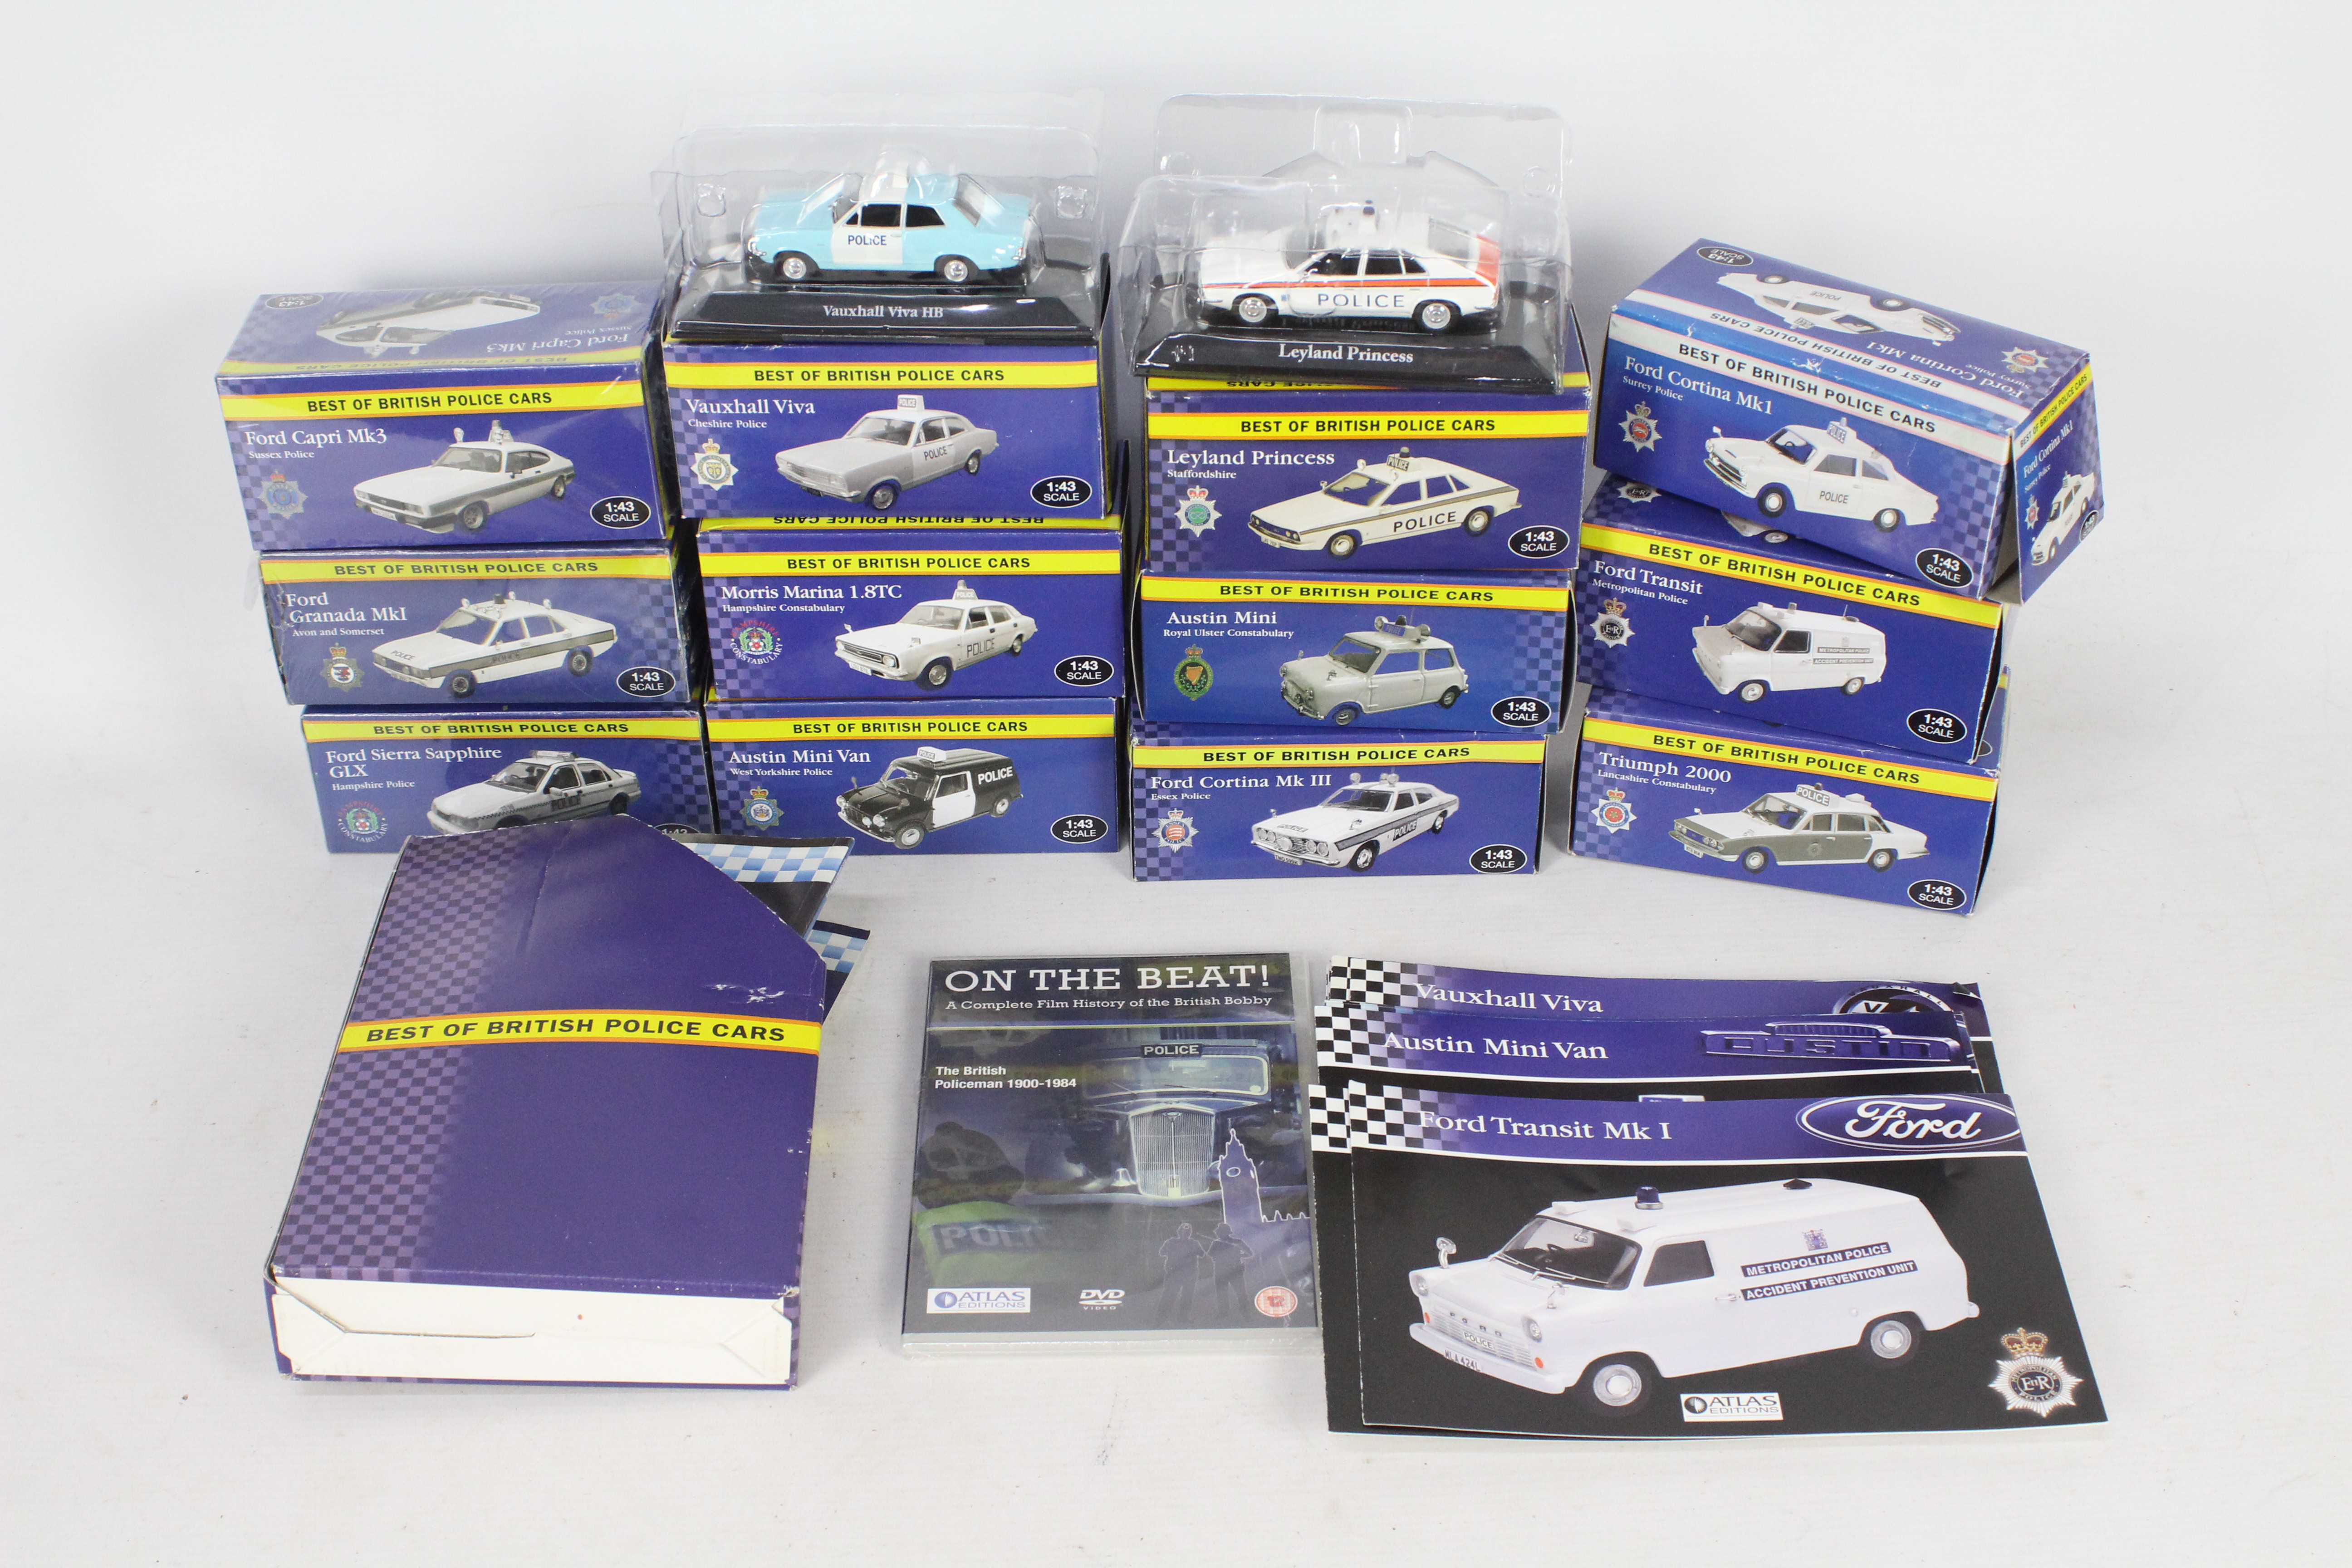 Atlas Editions - A squad of 12 1:43 scale diecast model police vehicles from the Atlas Editions